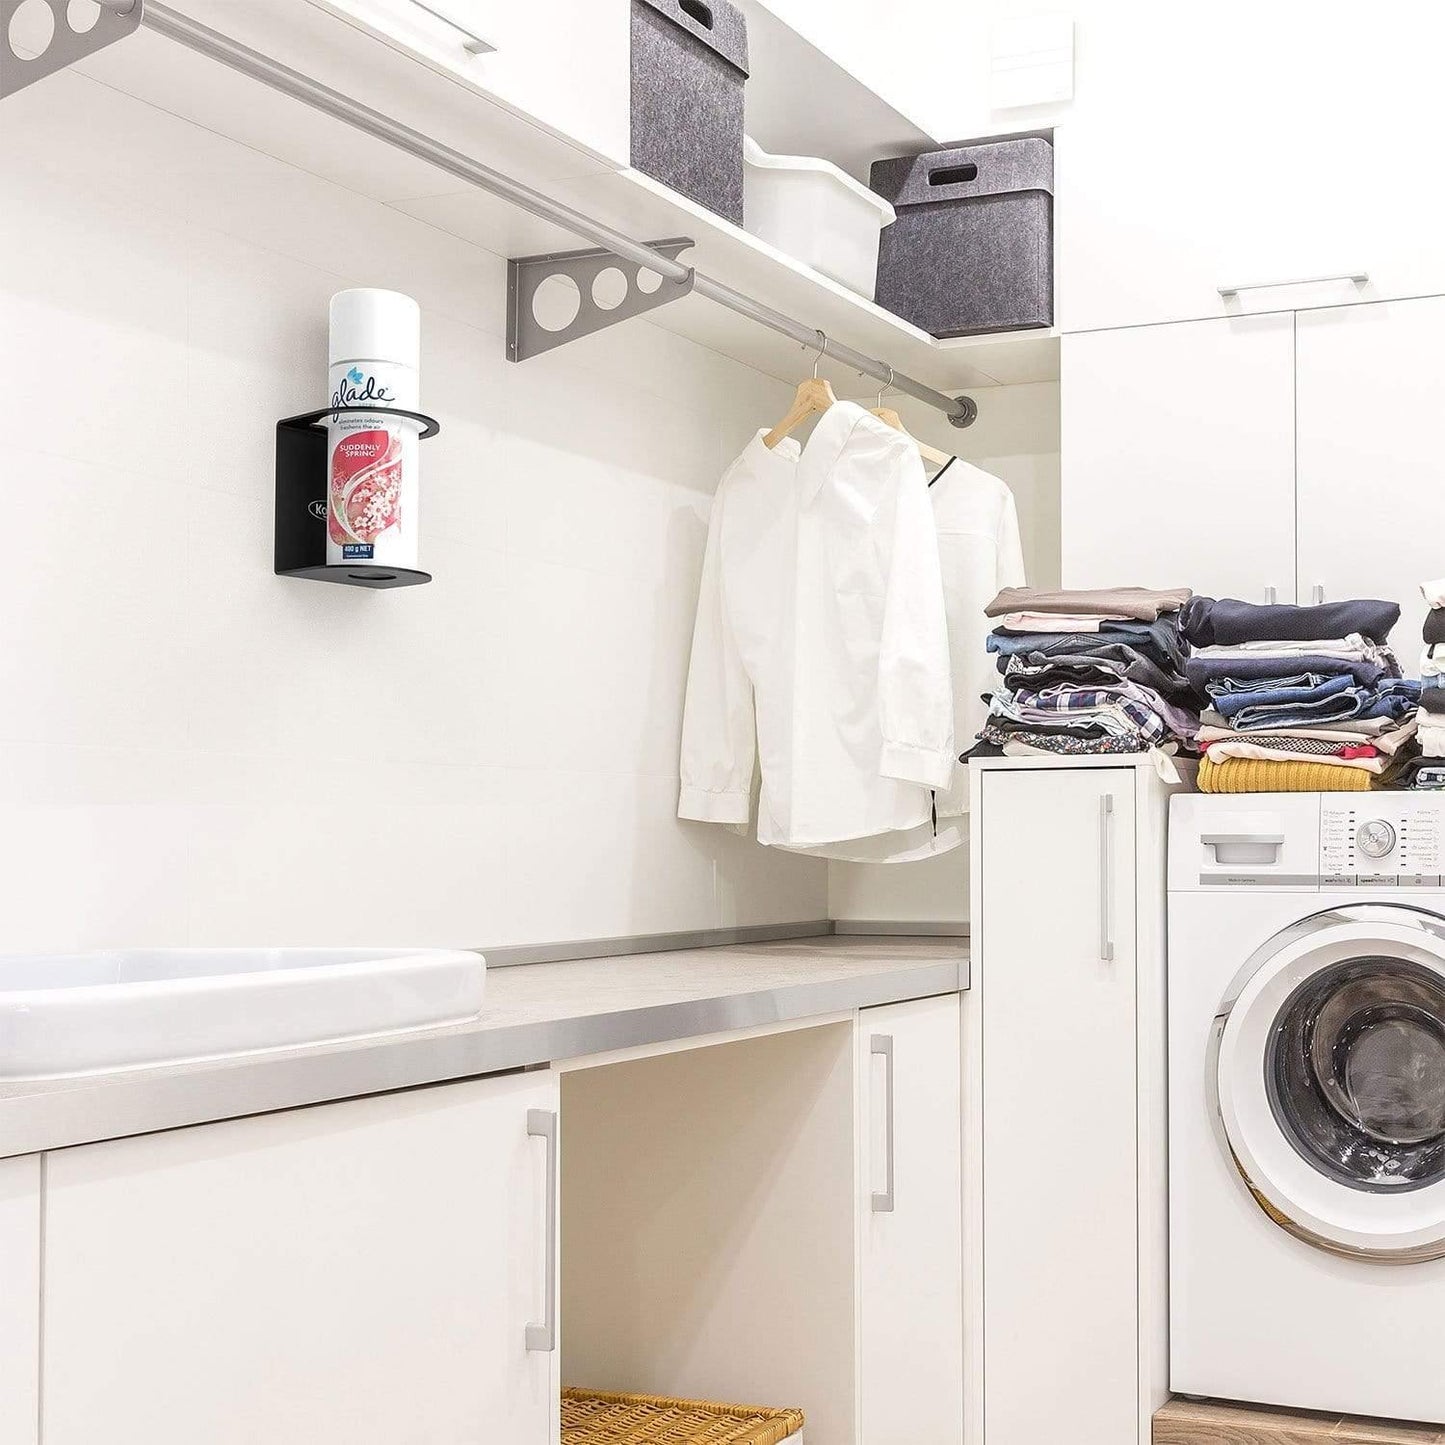 Mount your spray cans on the wall for quick and easy access in your laundry room